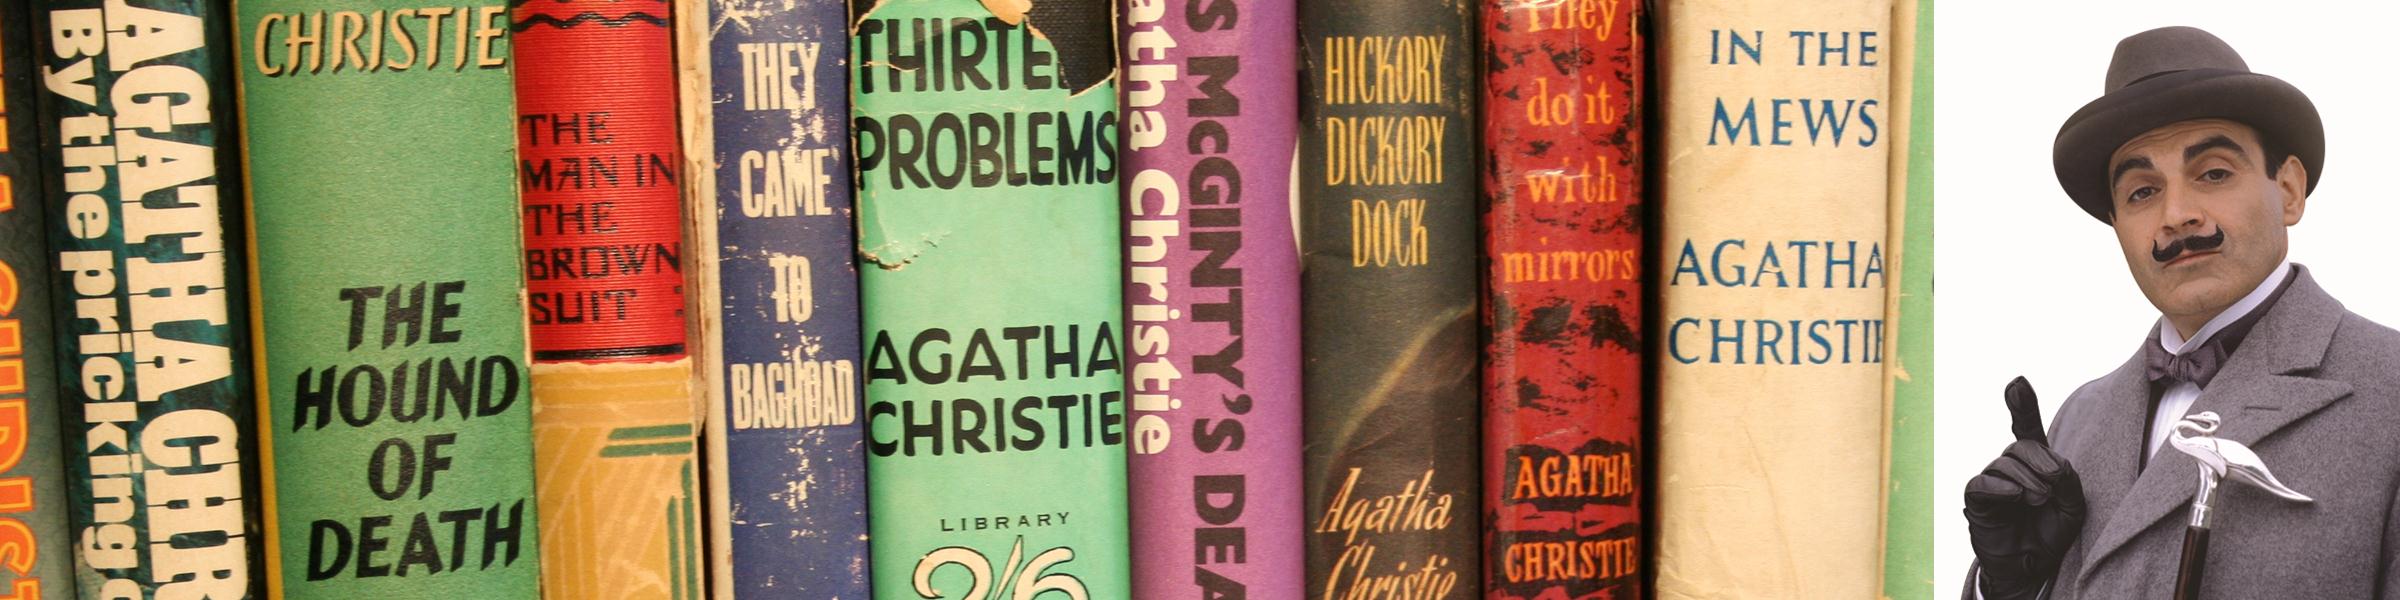 Agatha Christie Collection at Torquay Museum